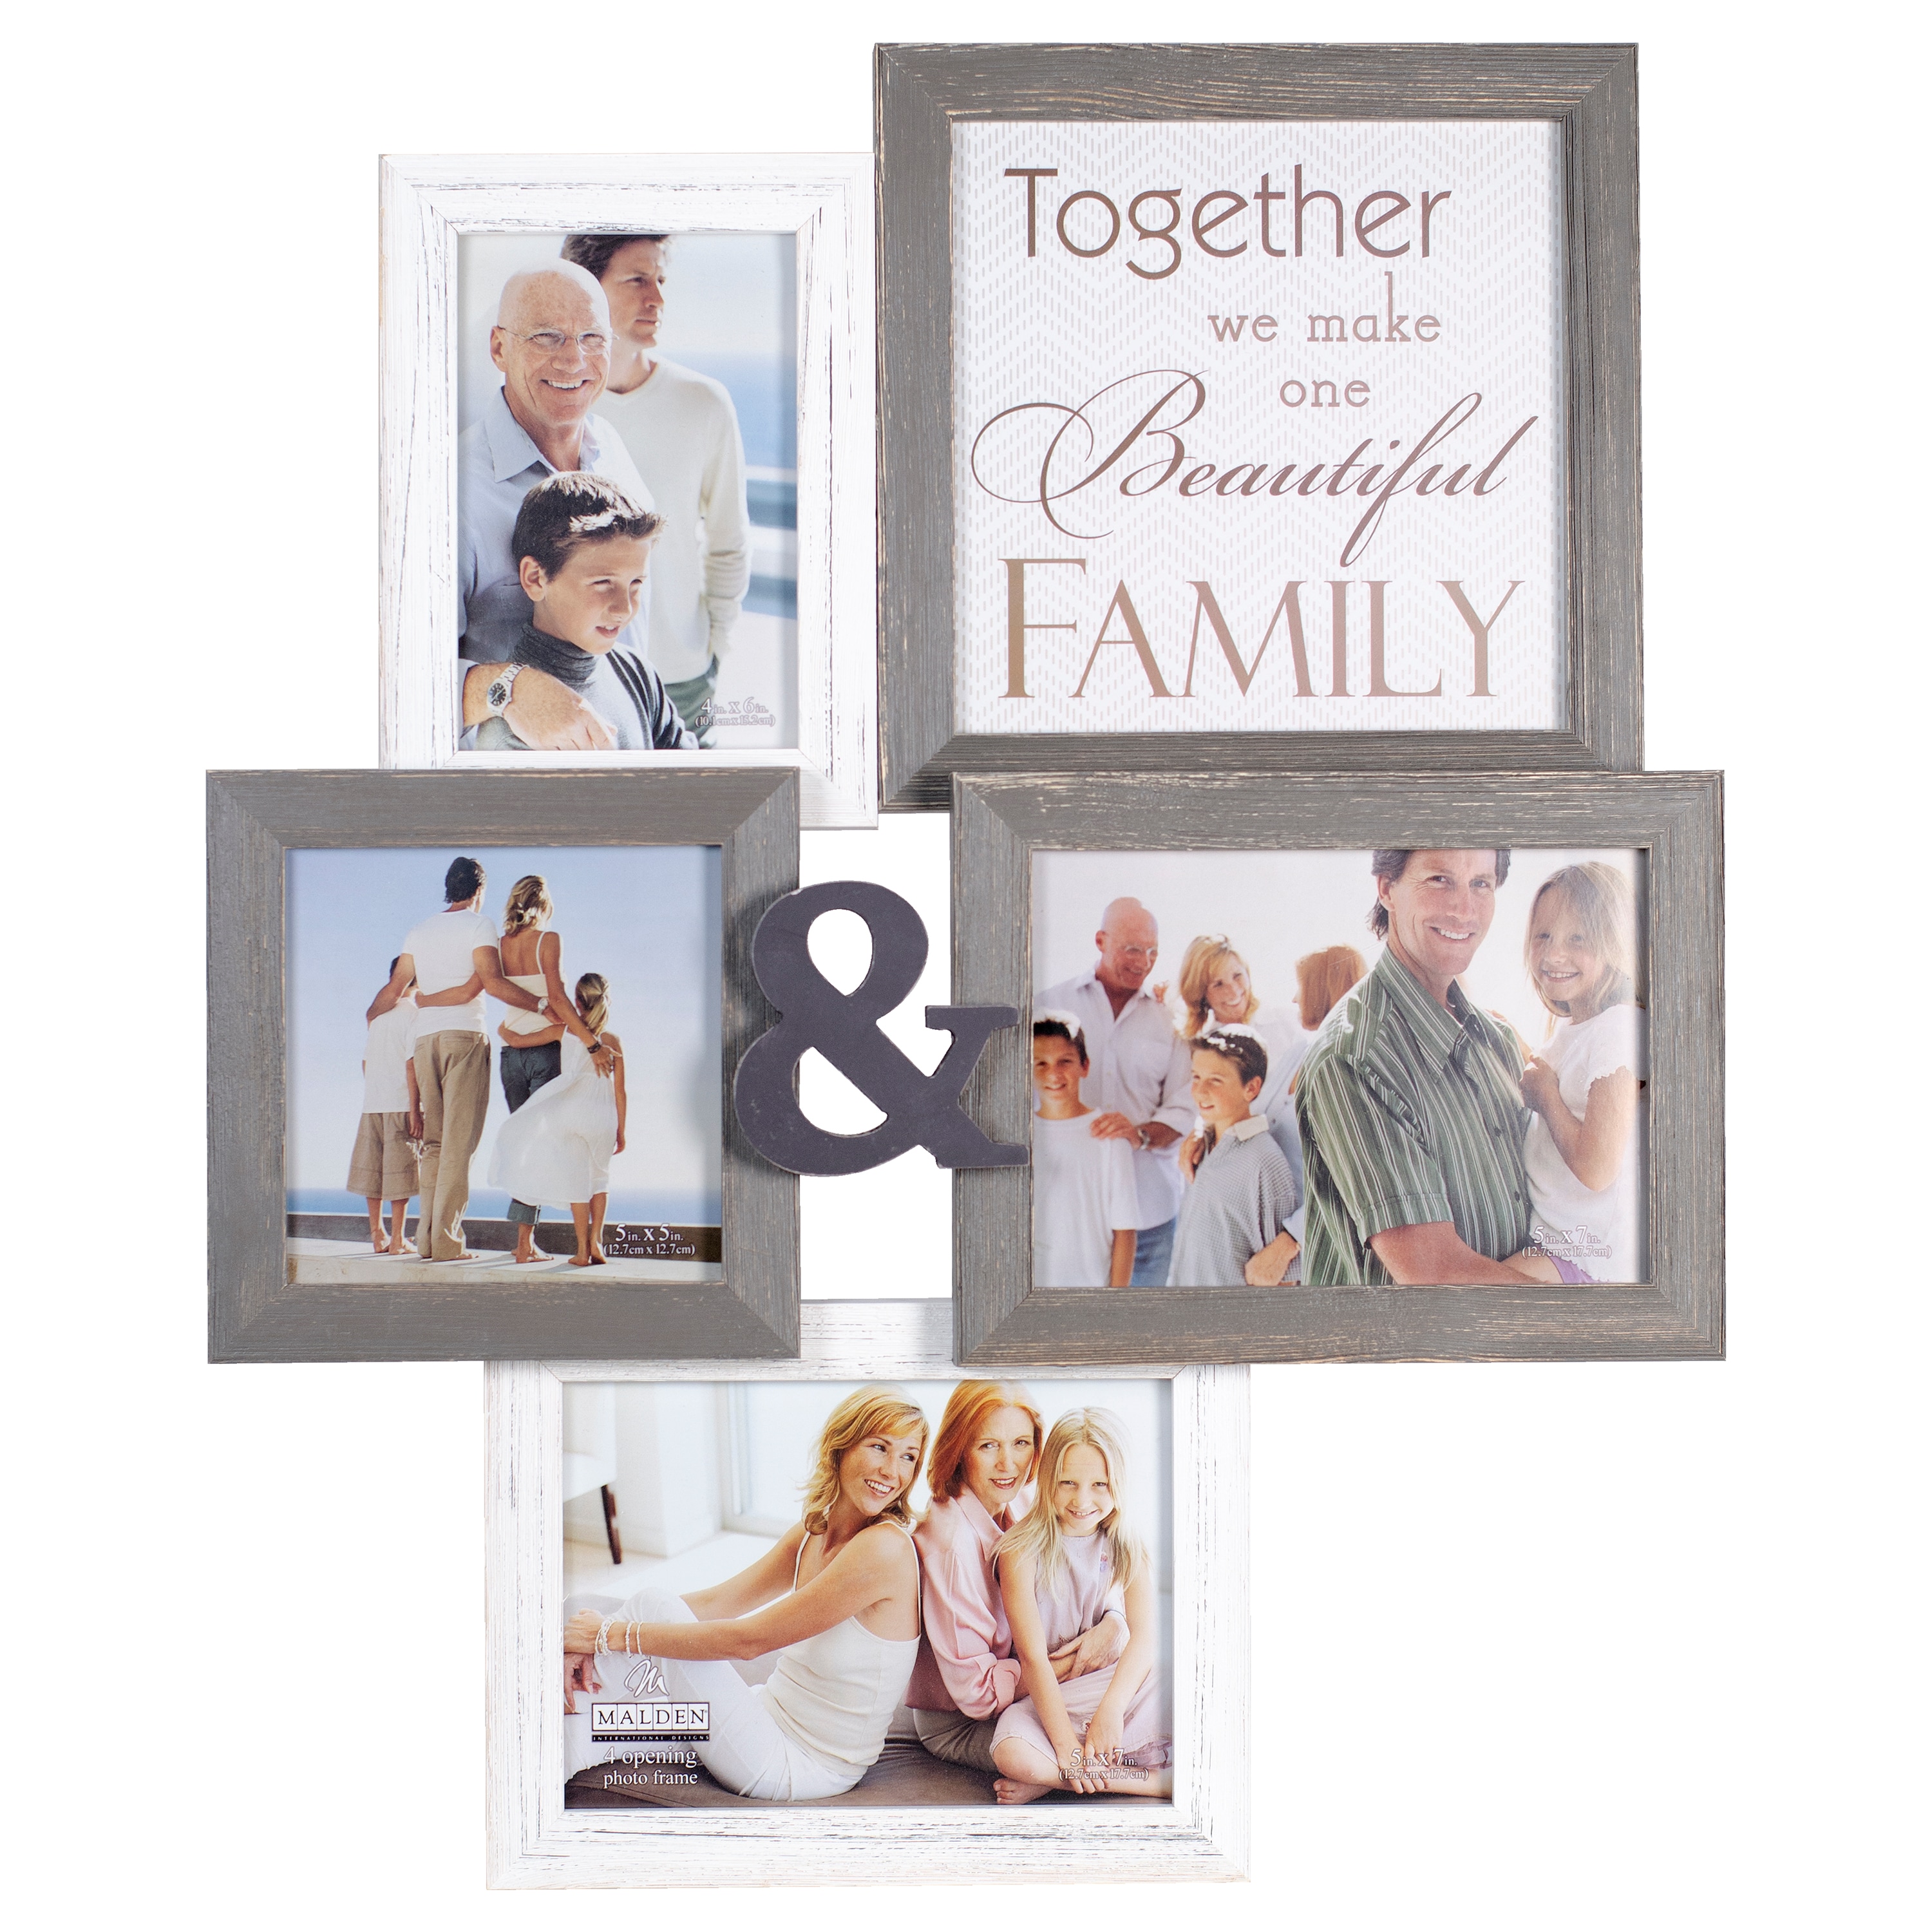 Malden 3-Opening Distressed Collage Picture Frame - Gray - 1 Each